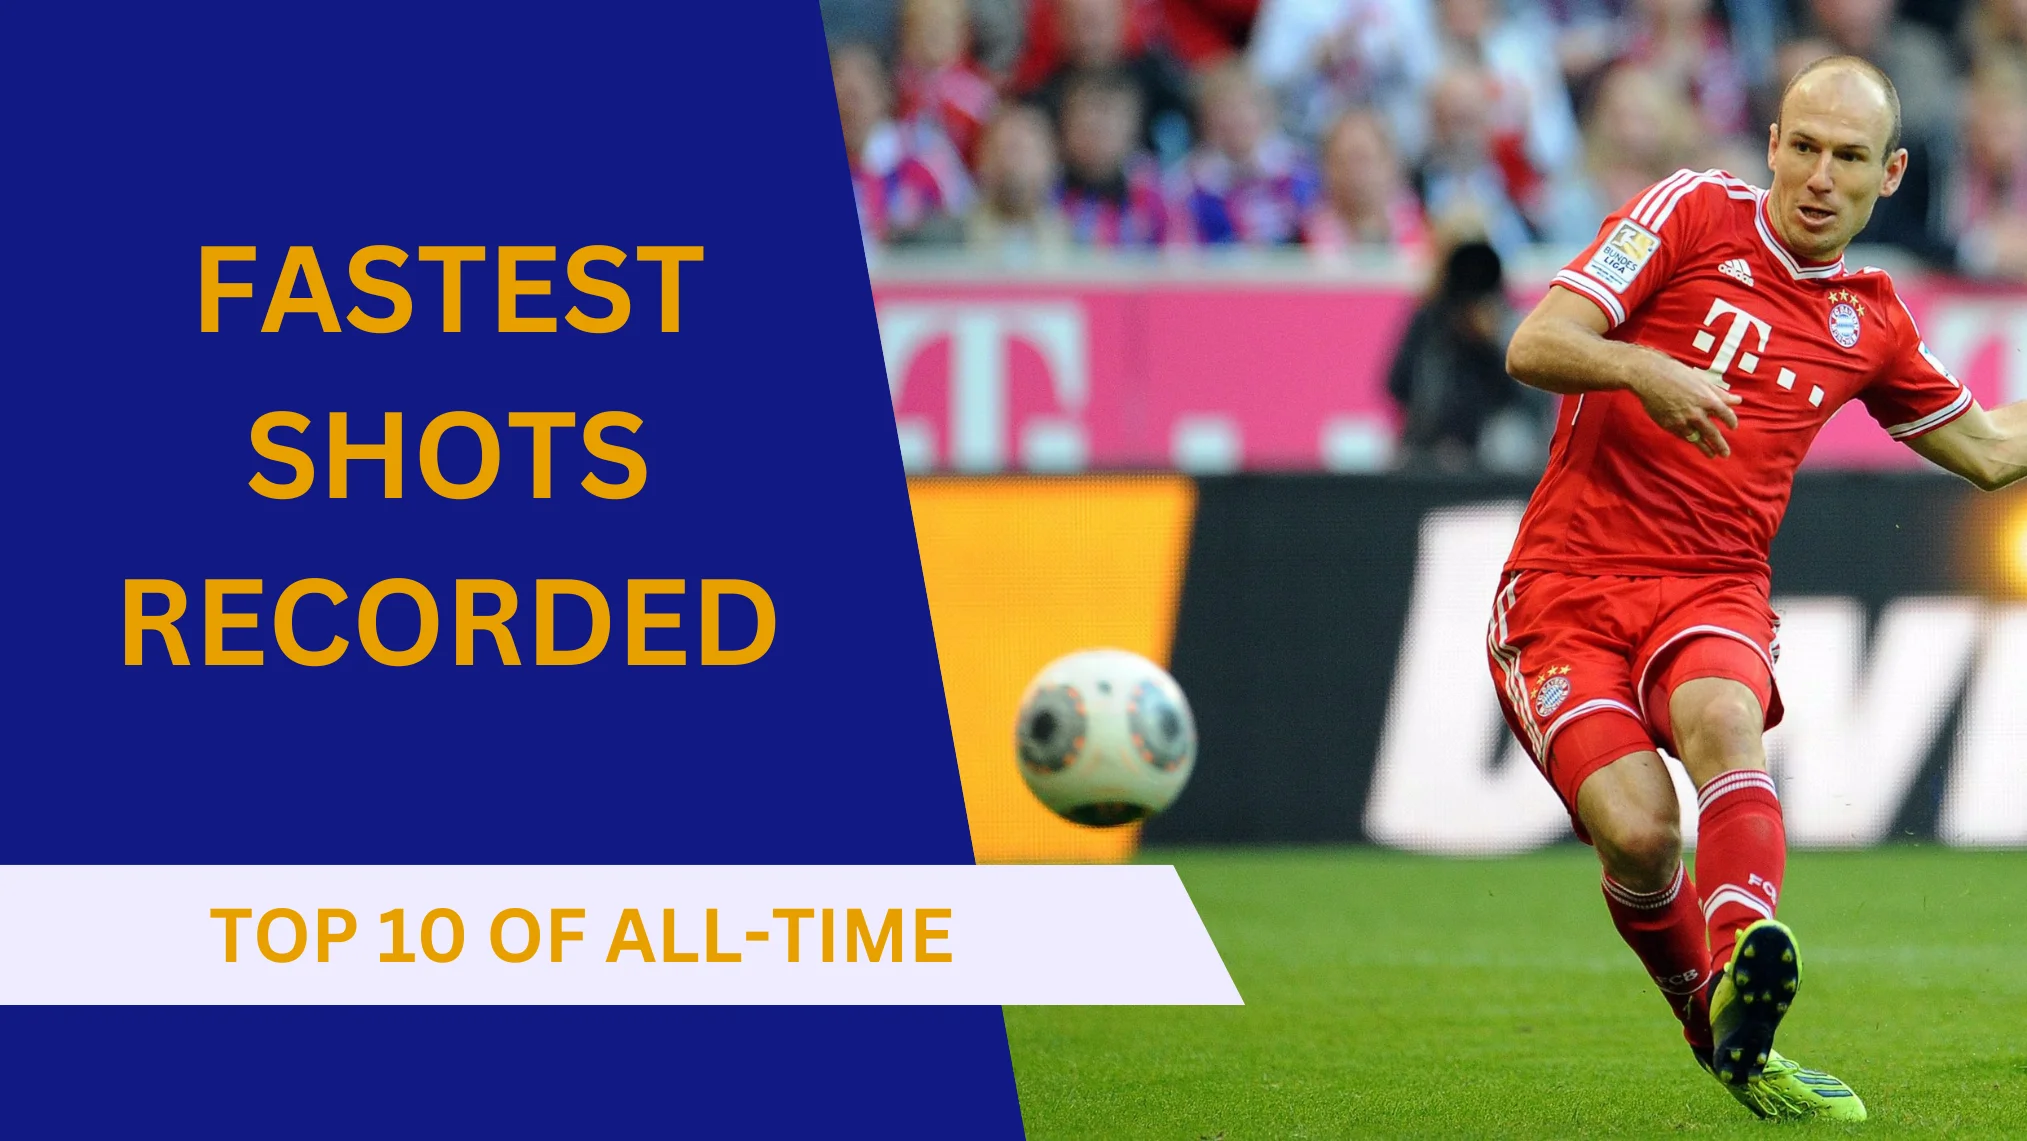 Top 10 fastest shots recorded in football history